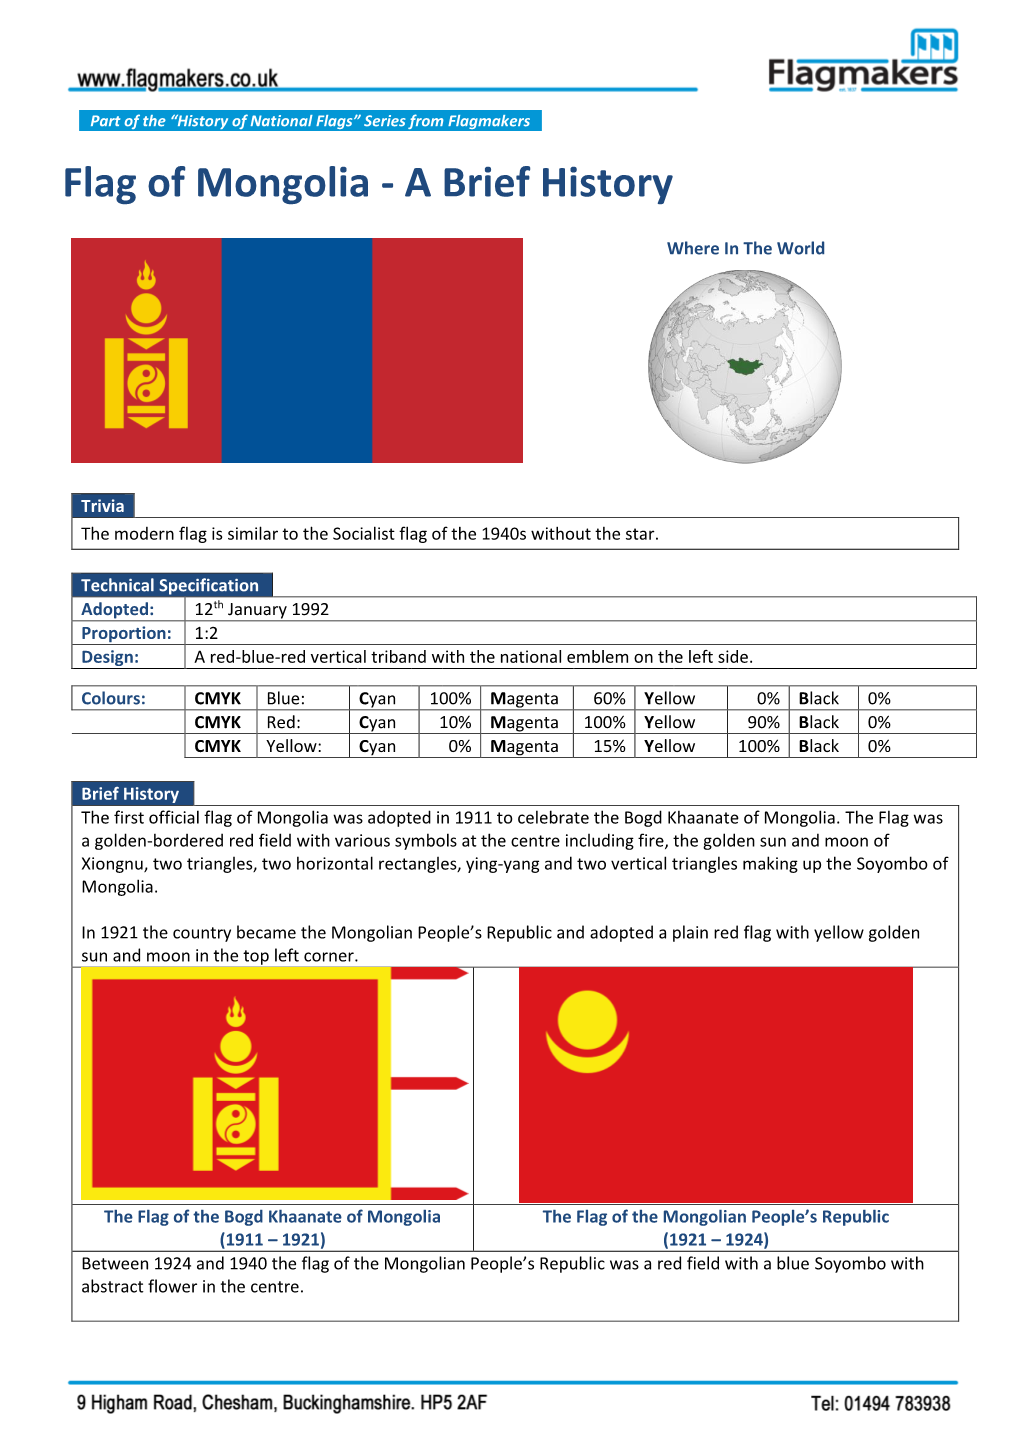 Flag of Mongolia - a Brief History